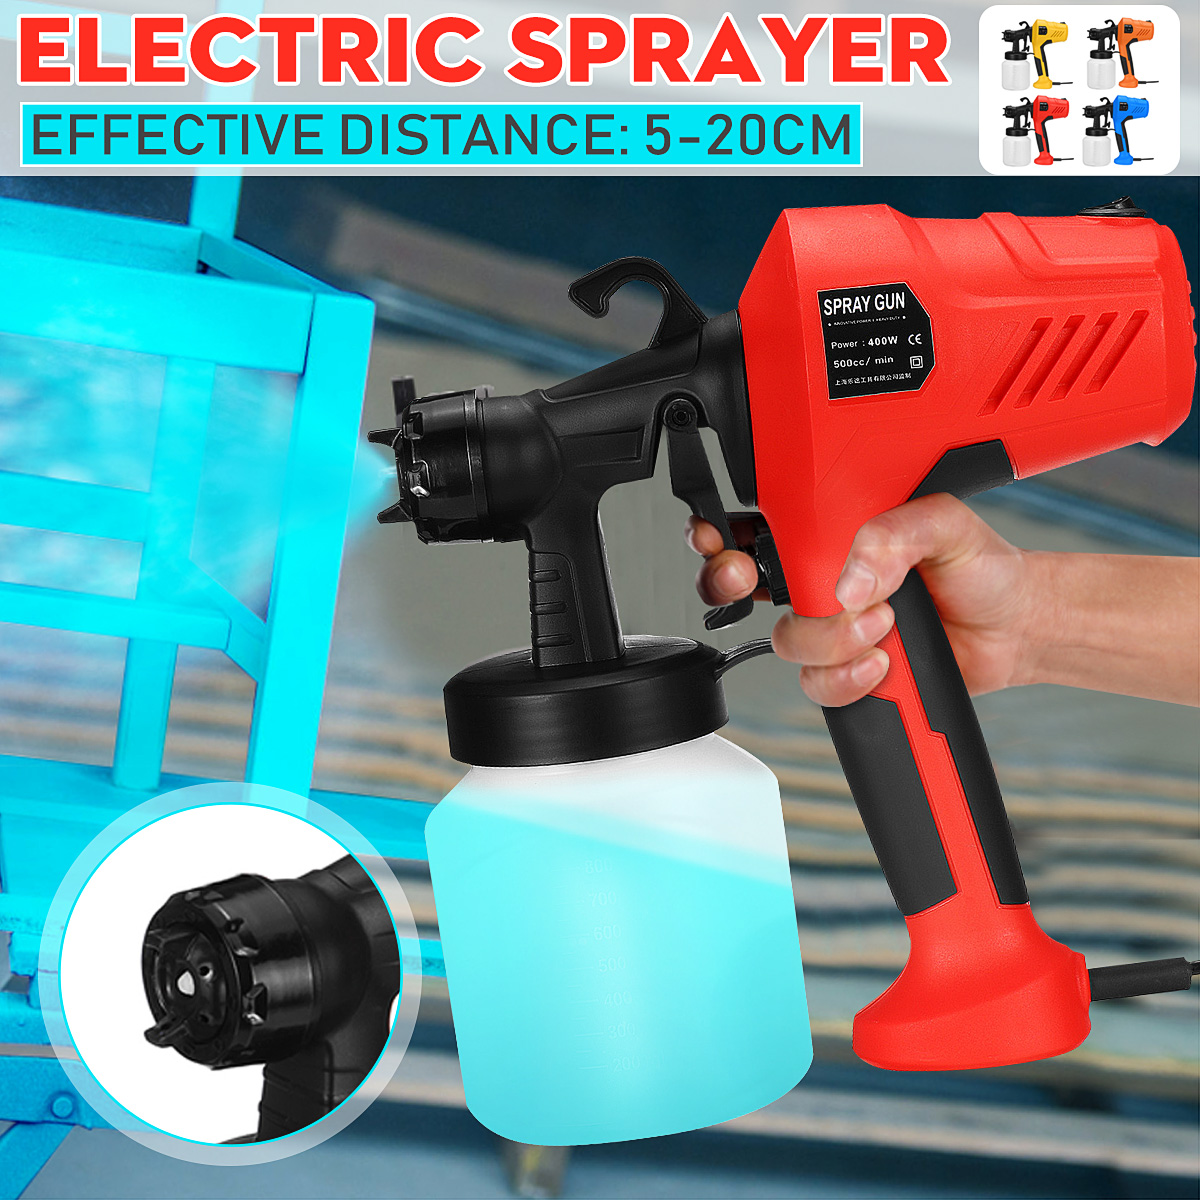 400W-800ml-Electric-Paint-Sprayer-Flow-Control-Airbrush-Easy-Spraying-Painting-Tool-1761119-2